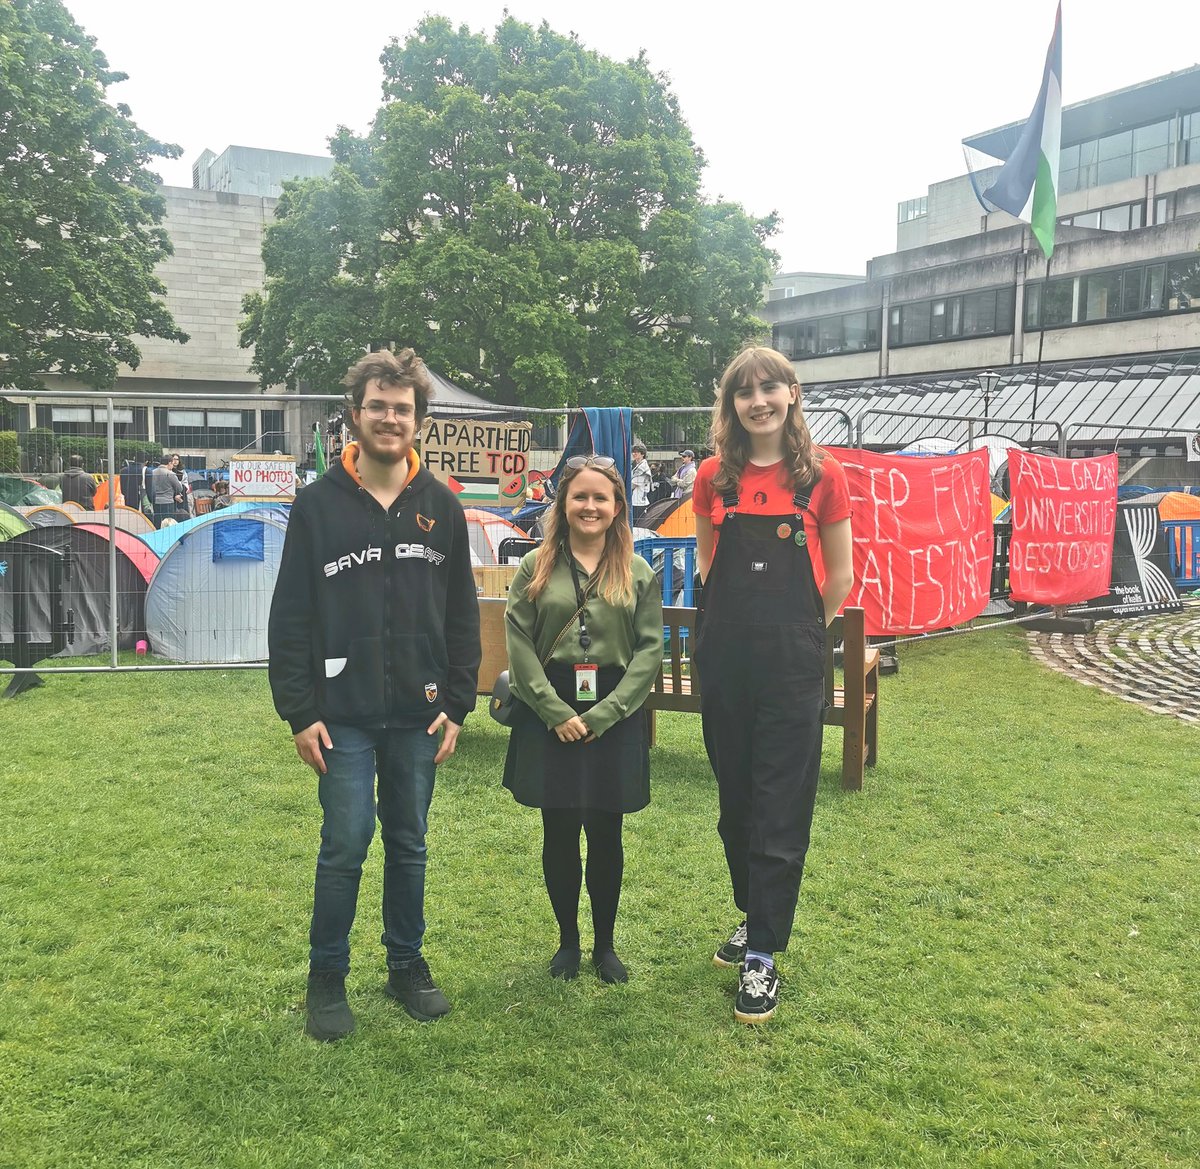 Popped down to show support to Trinity students and staff camping out for Trinity to meet the demands of Boycott, Divestment and Sanctions. @TCDSU_President @jennymaguir